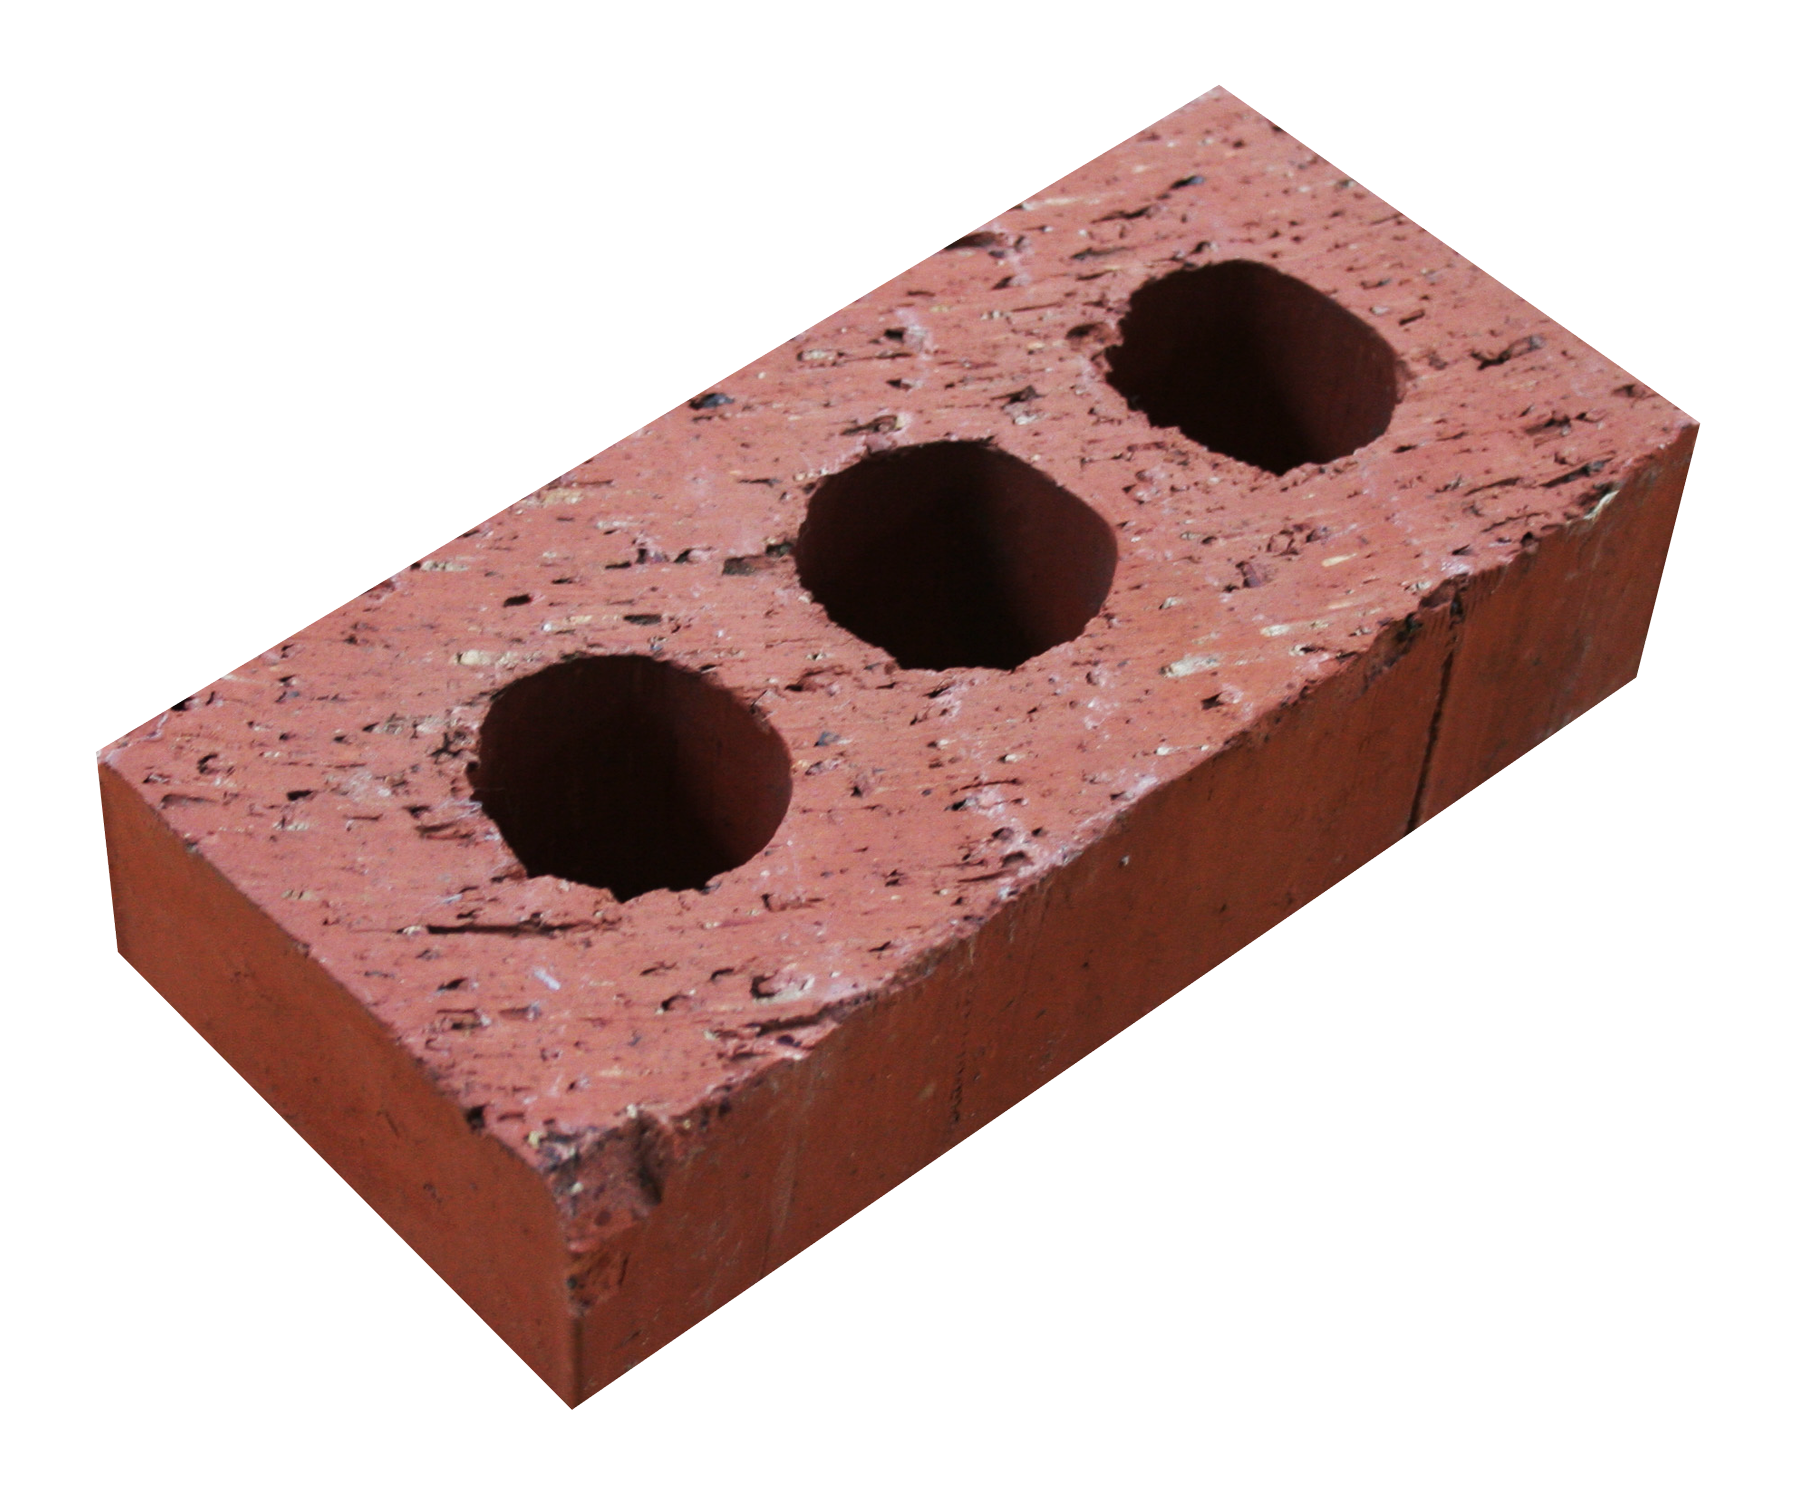 A Red Brick With Holes In It